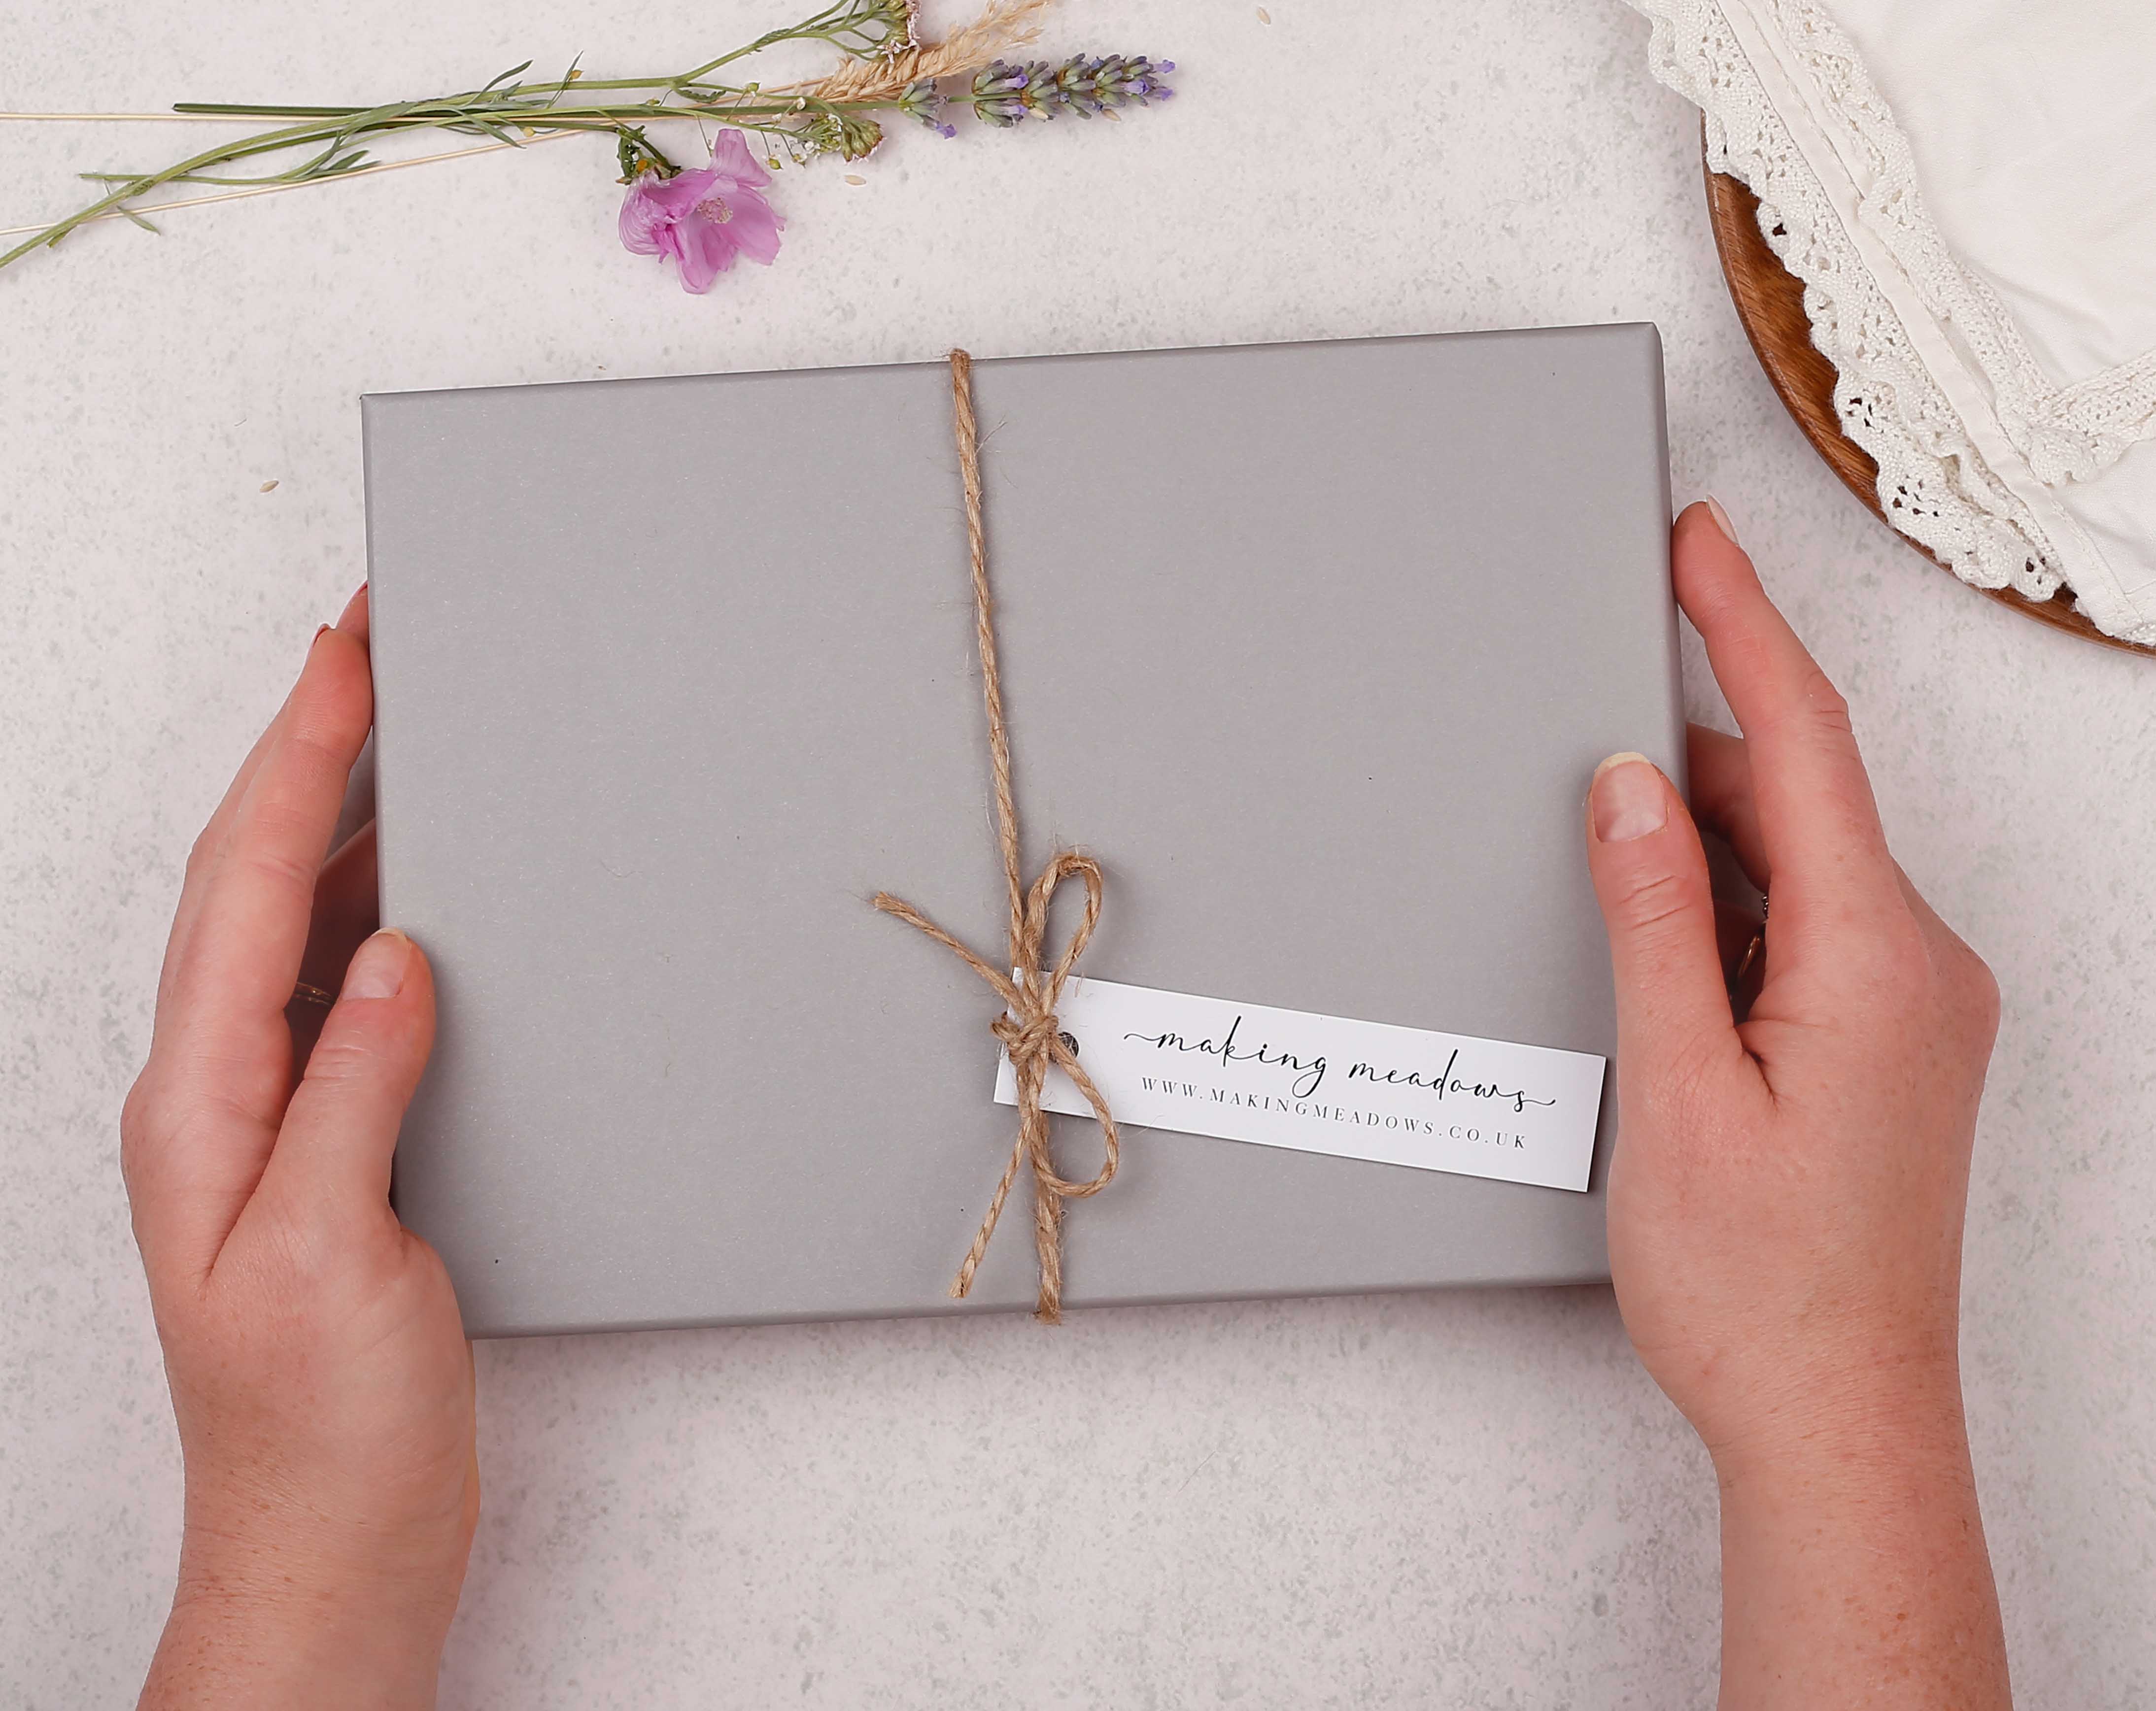 Premium personalised A5 letter writing paper set with a watering can bursting with cottage garden flowers. 